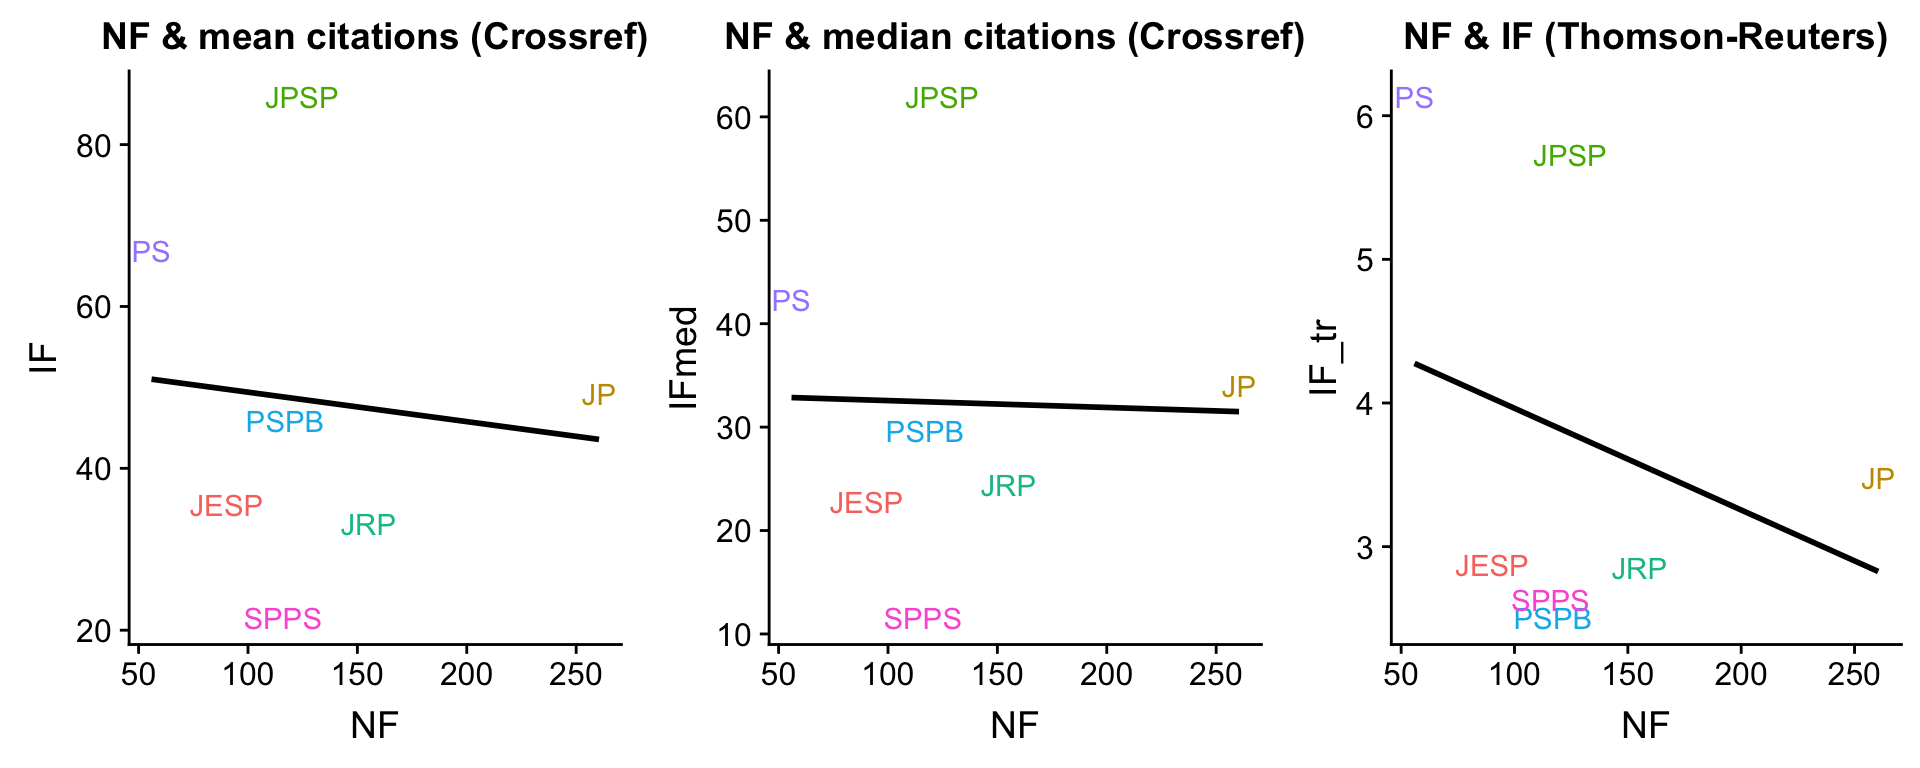 Correlation between IF and NF on the journal level.